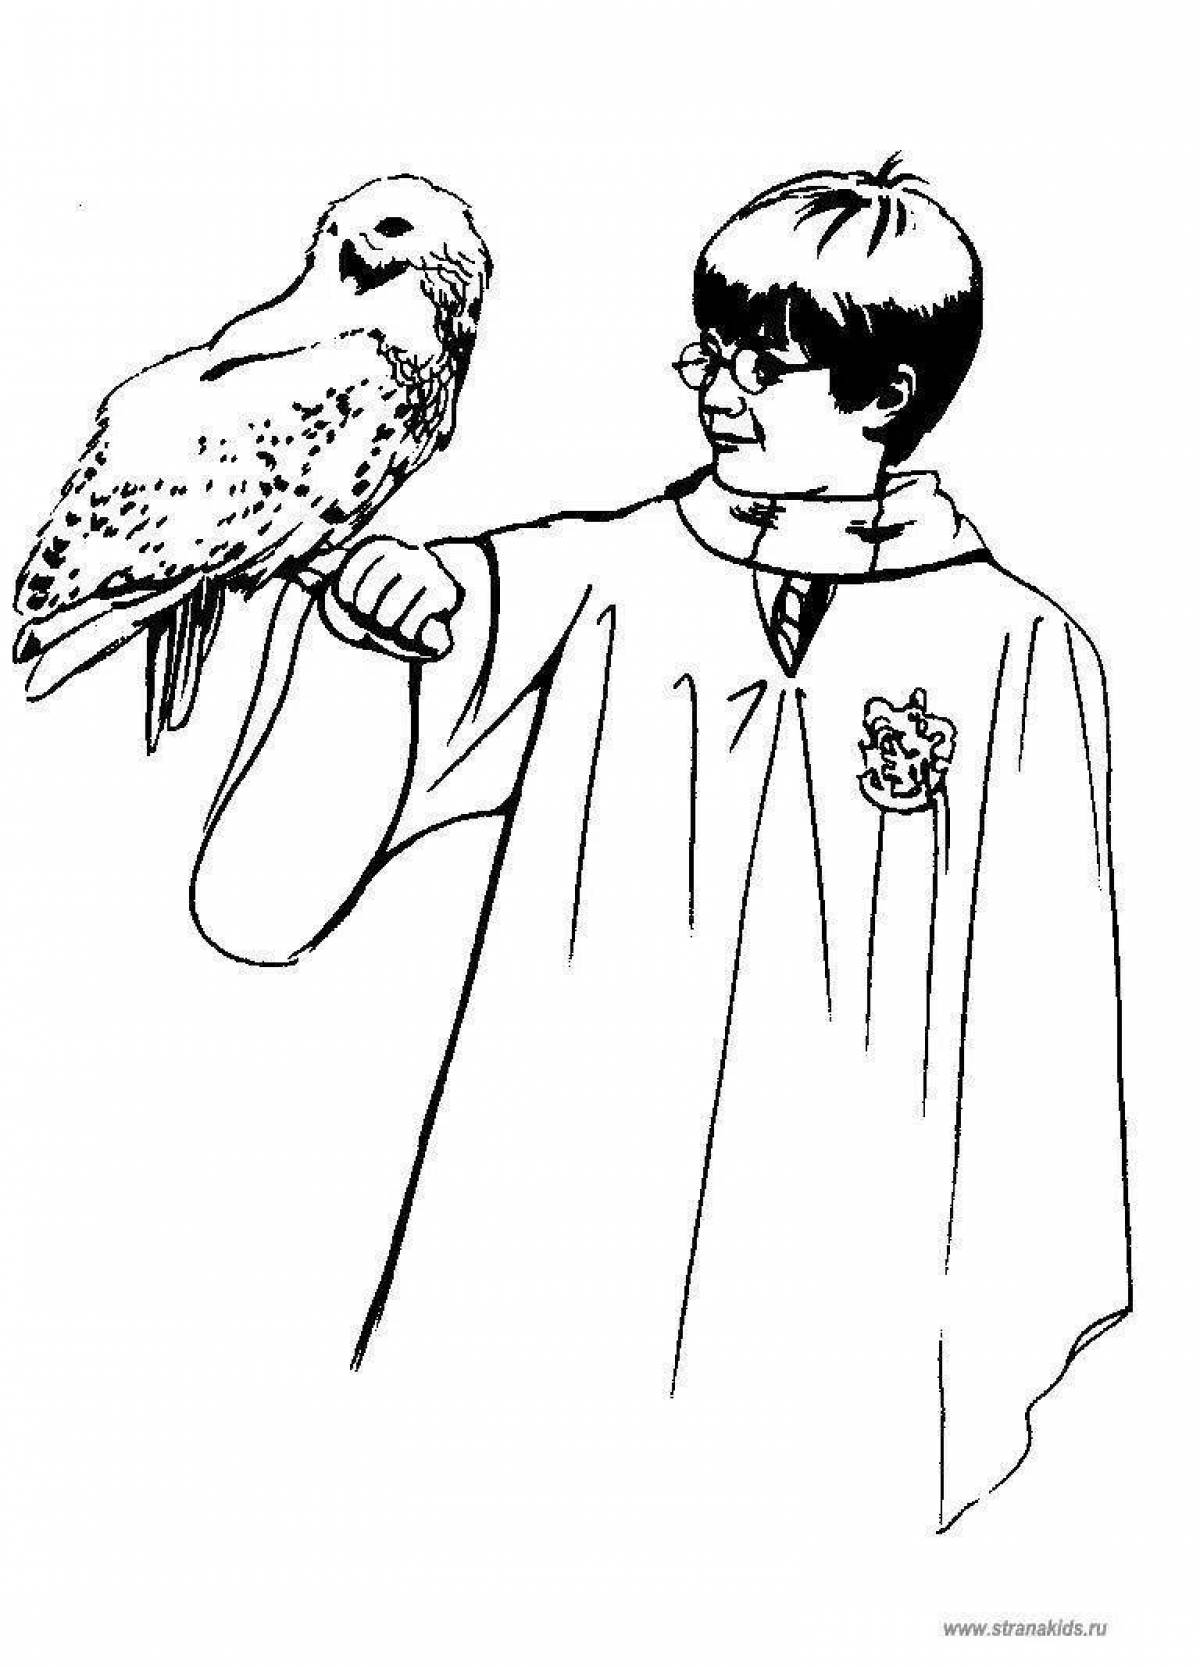 Elegant coloring of harry potter and philosopher's stone